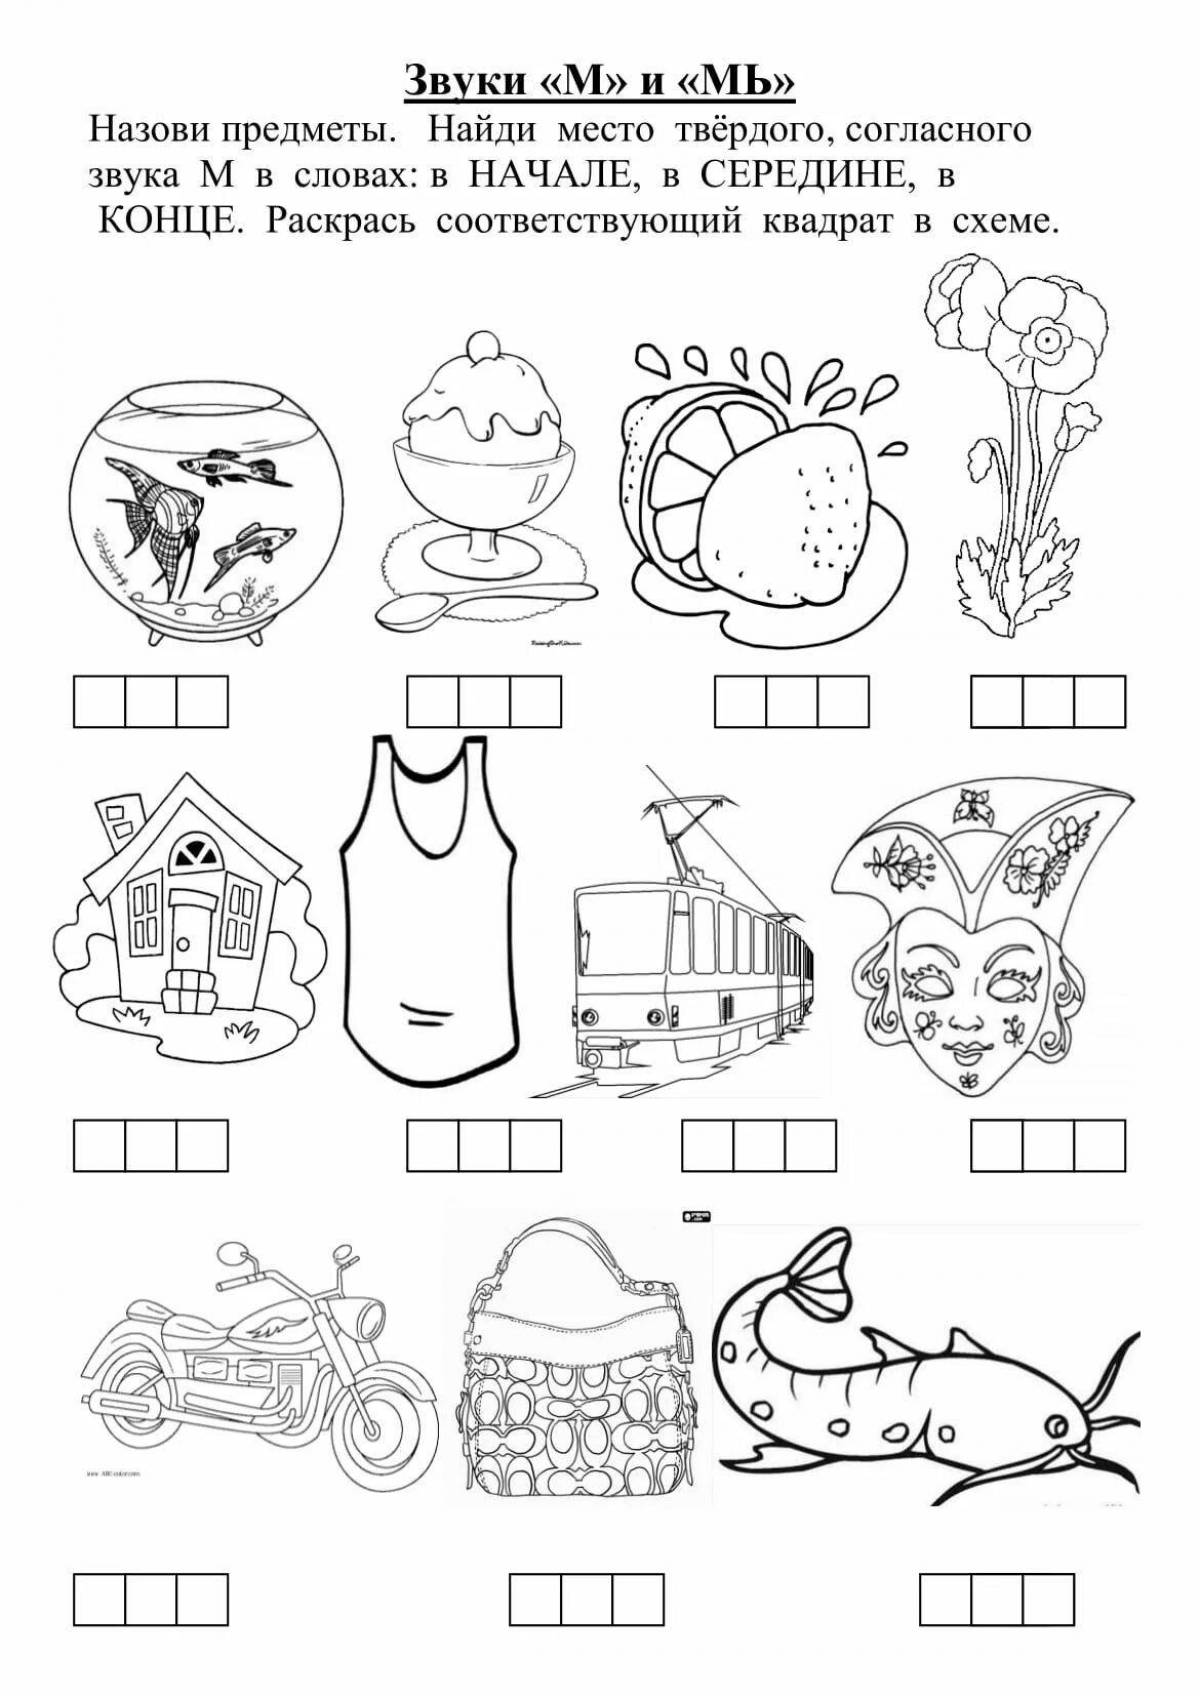 Joyful m sound coloring page for kids